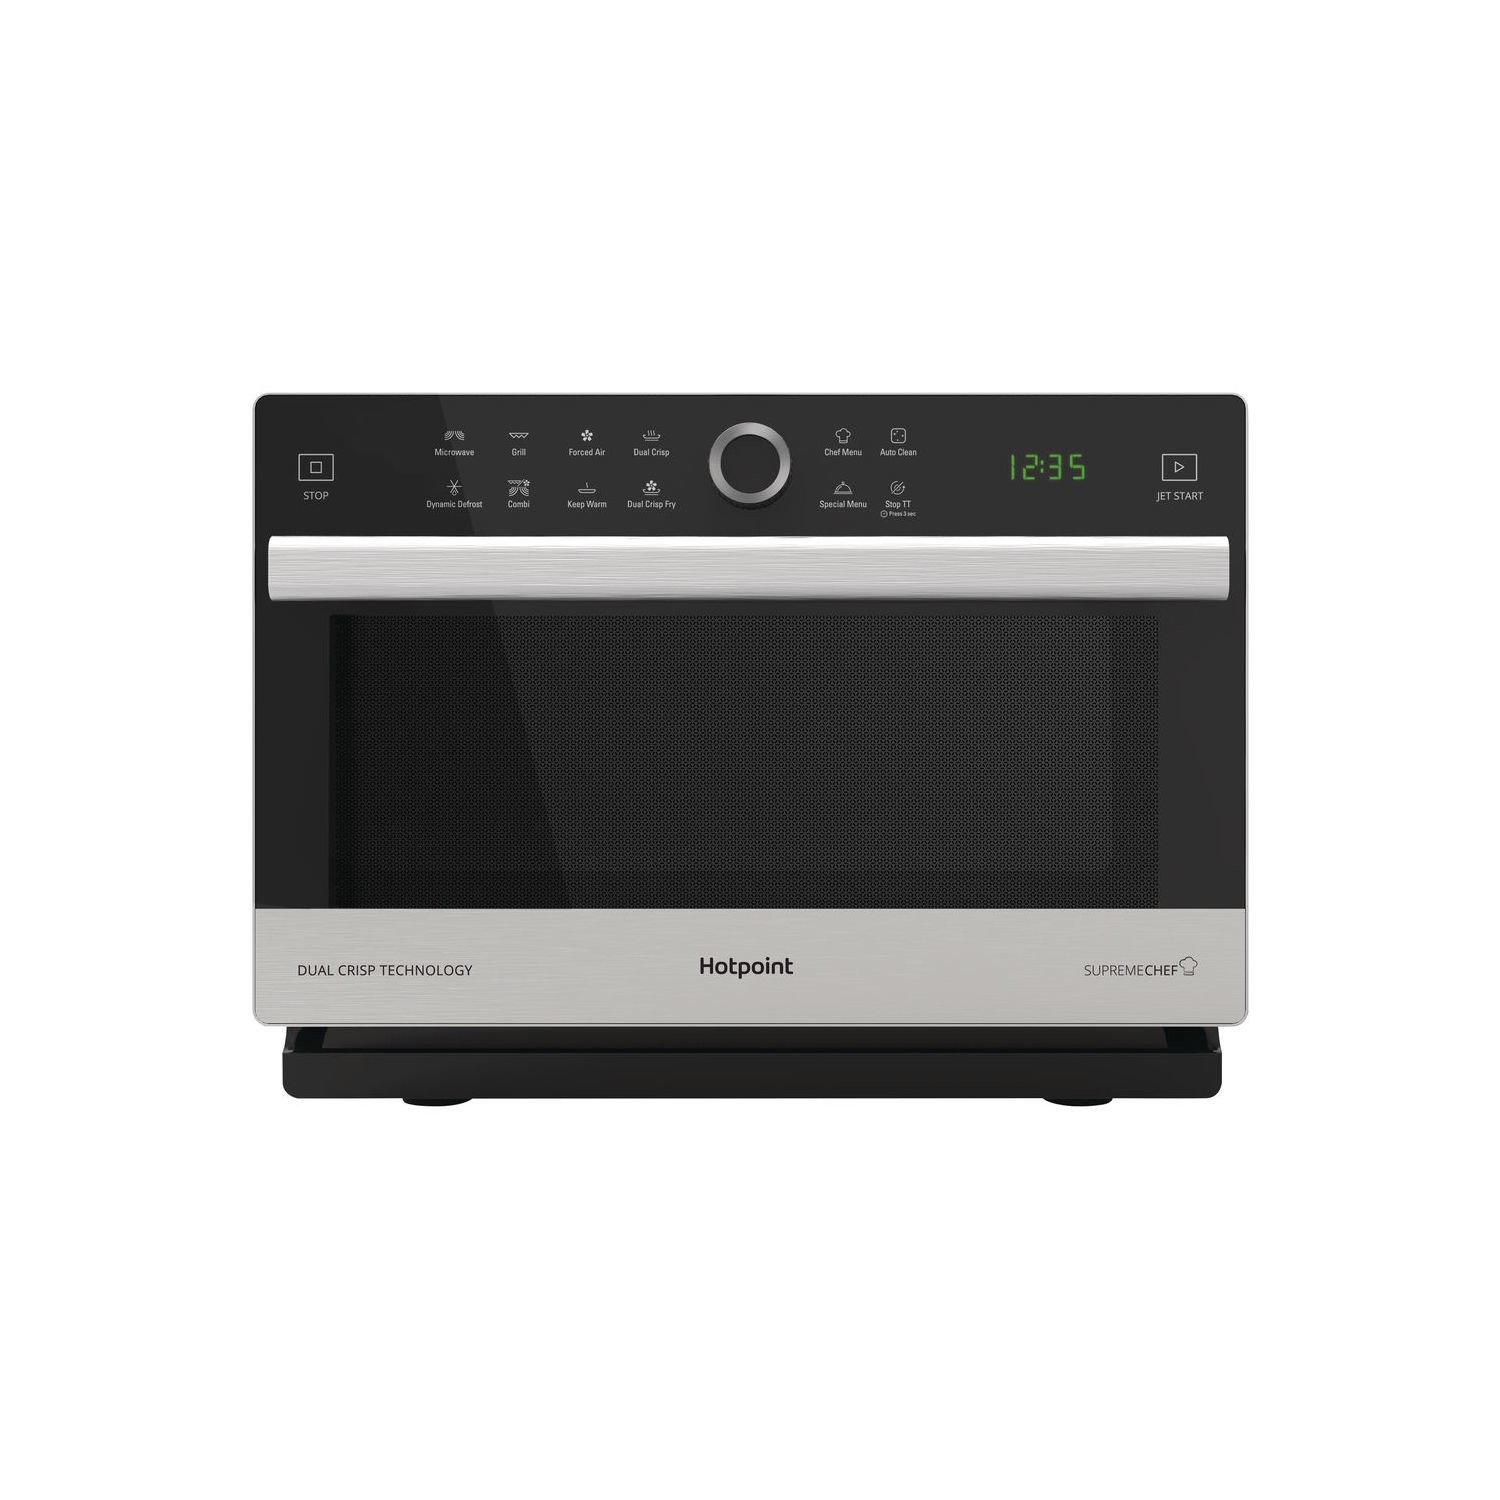 Refurbished Hotpoint MWH338SX 33L 900W Microwave Stainless Steel